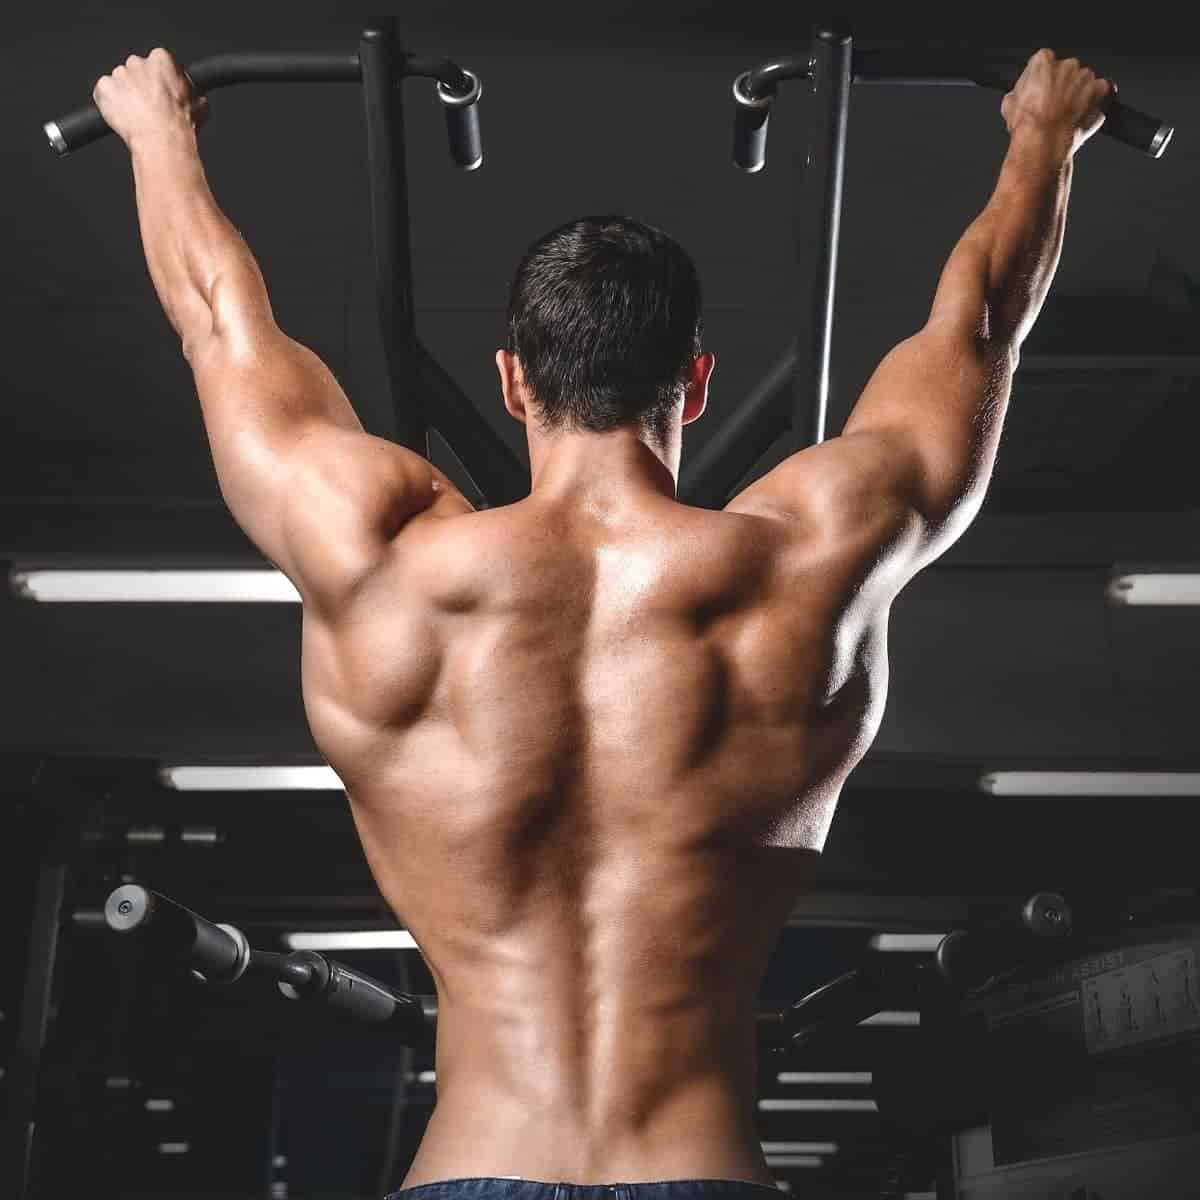 Person's back muscles while doing a pull-up.